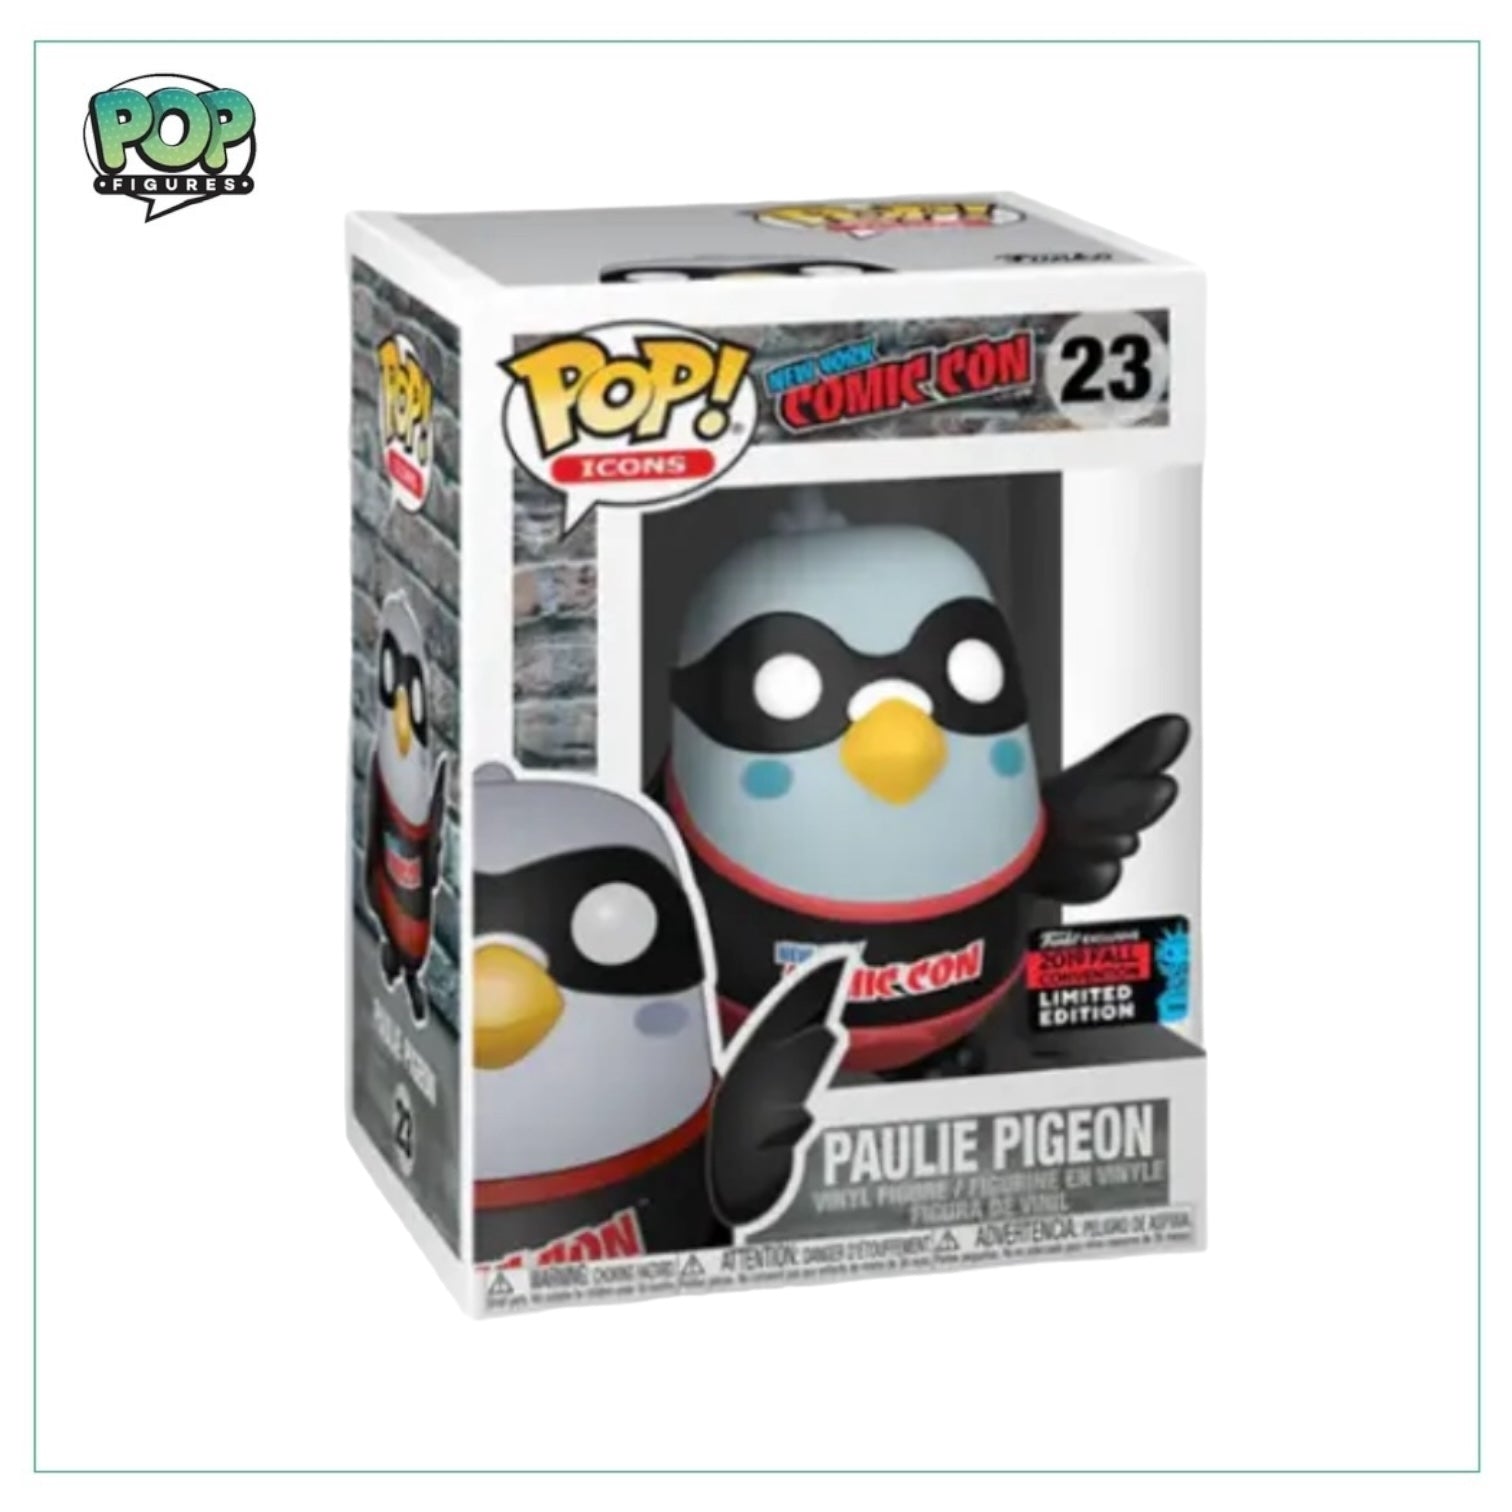 Paulie Pigeon (Black) #23 Funko Pop!  - Icons, - 2019 NYCC Limited Edition